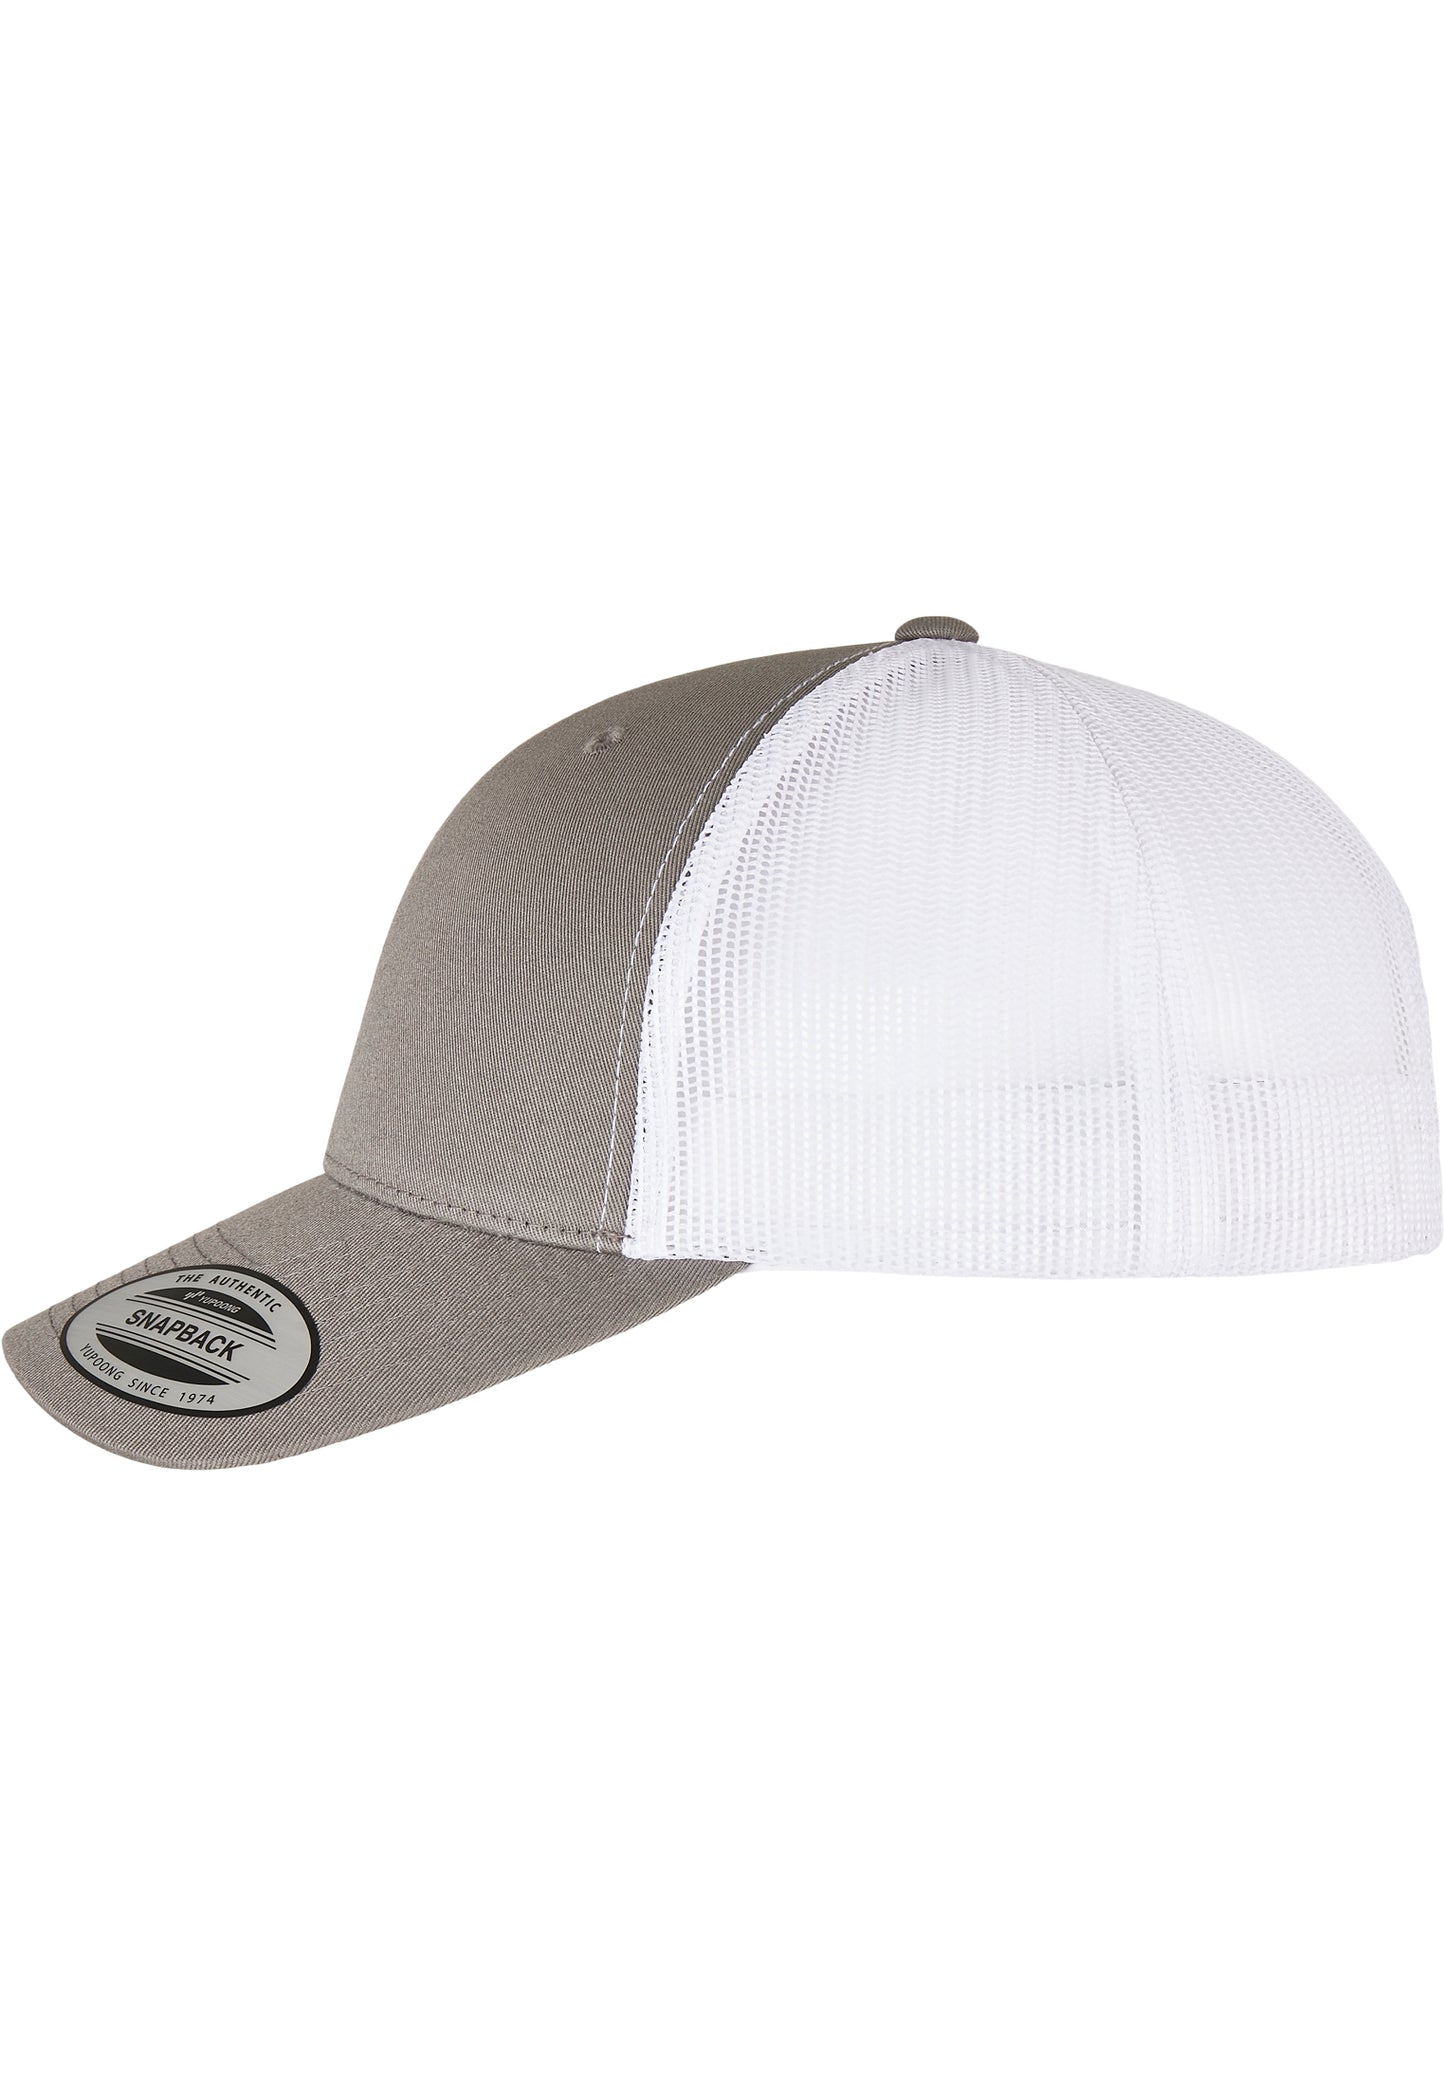 Yupoong Classics Recycled Retro Trucker Cap 2-TONE in grey/white